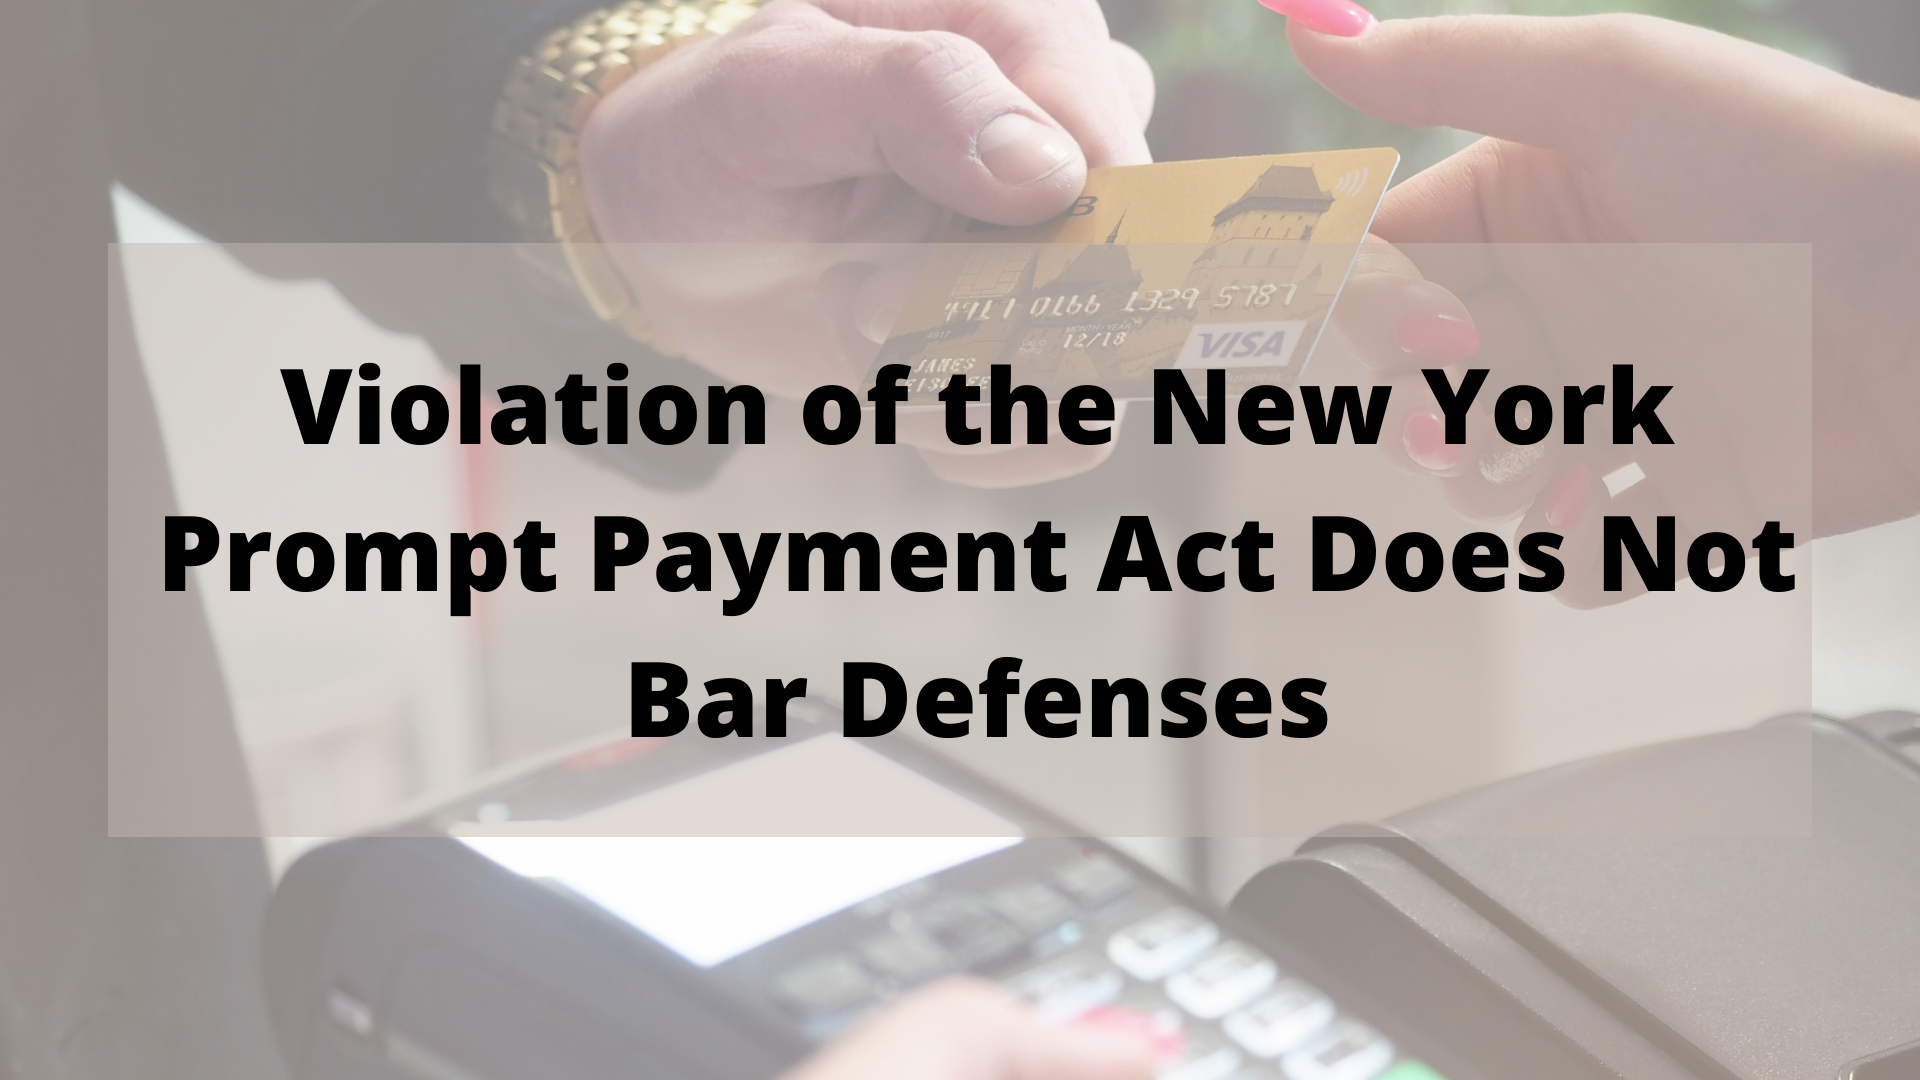 violation-of-the-new-york-prompt-payment-act-does-not-bar-defenses